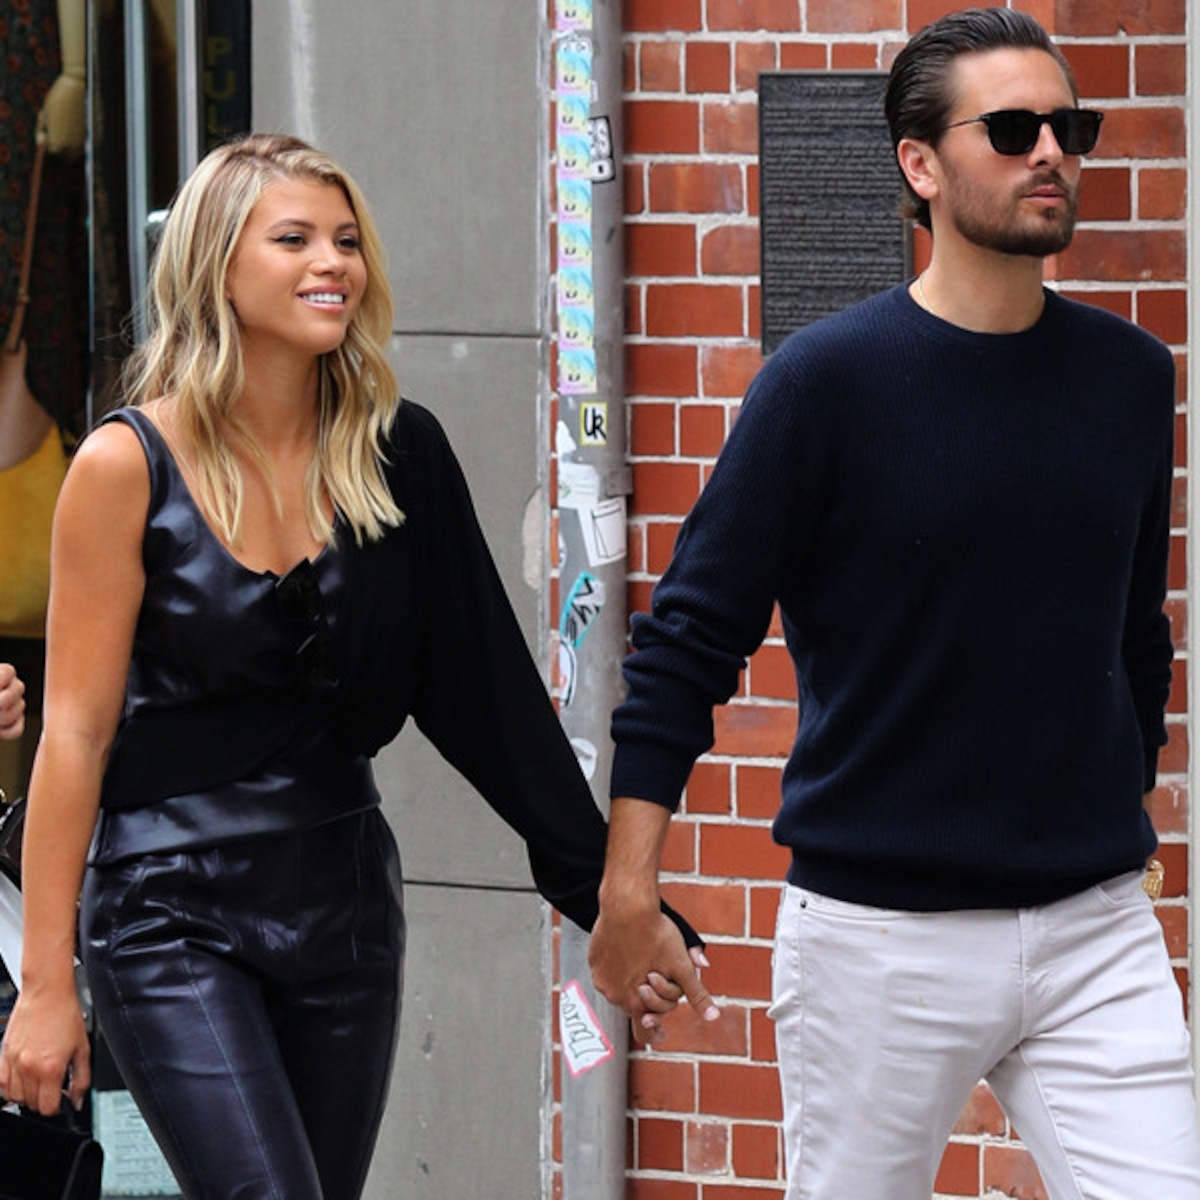 Is everything fine between Kourtney Kardashian and Sofia Richie? Does Scott Disick have any role in the conflict? Read to know! 9